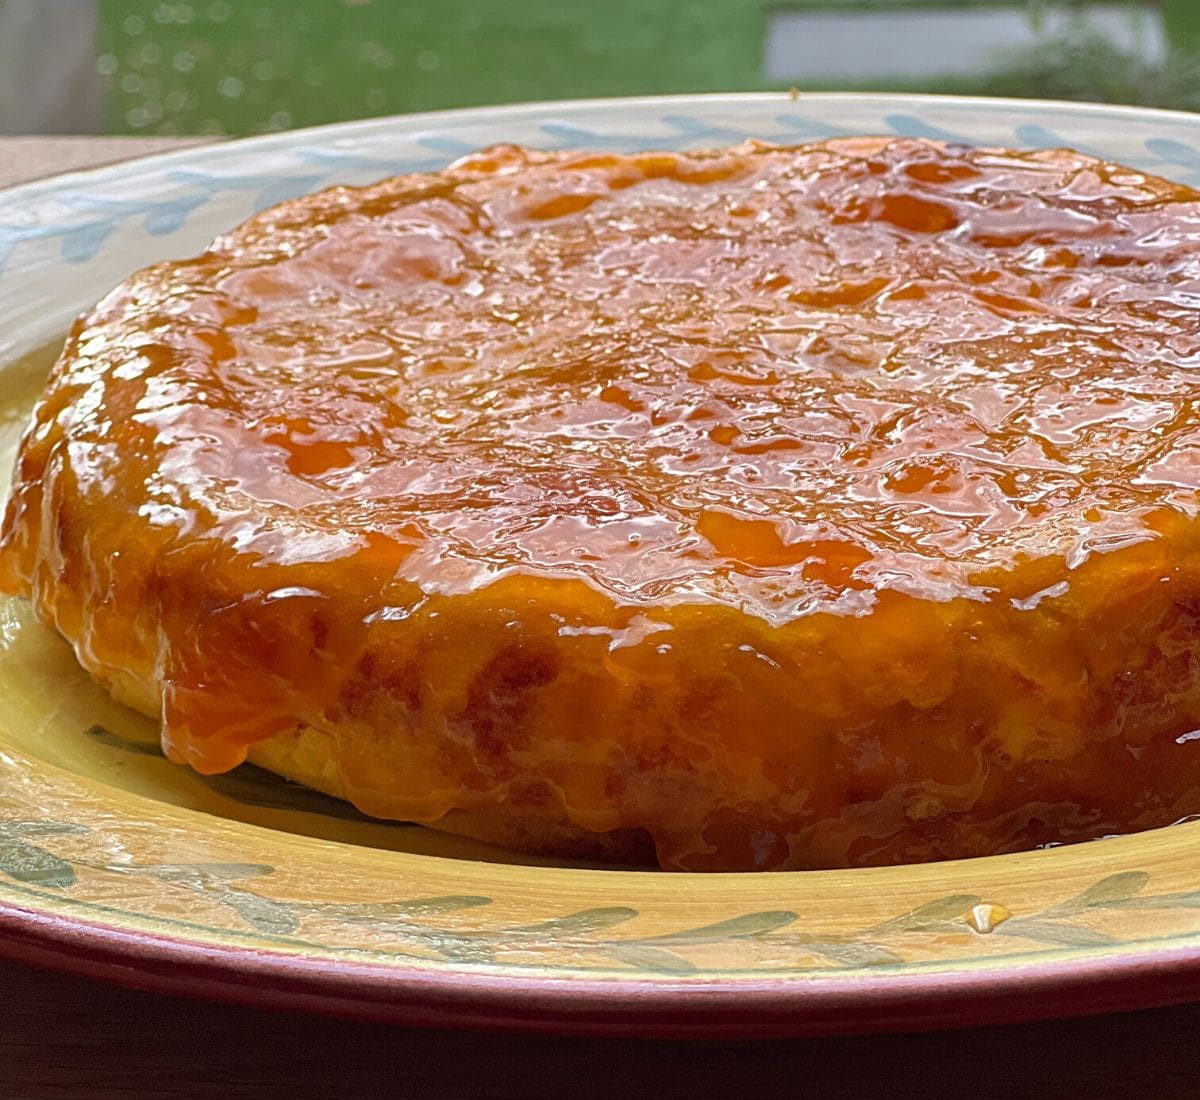 Orange cake covered in apricot glaze on yellow plate.